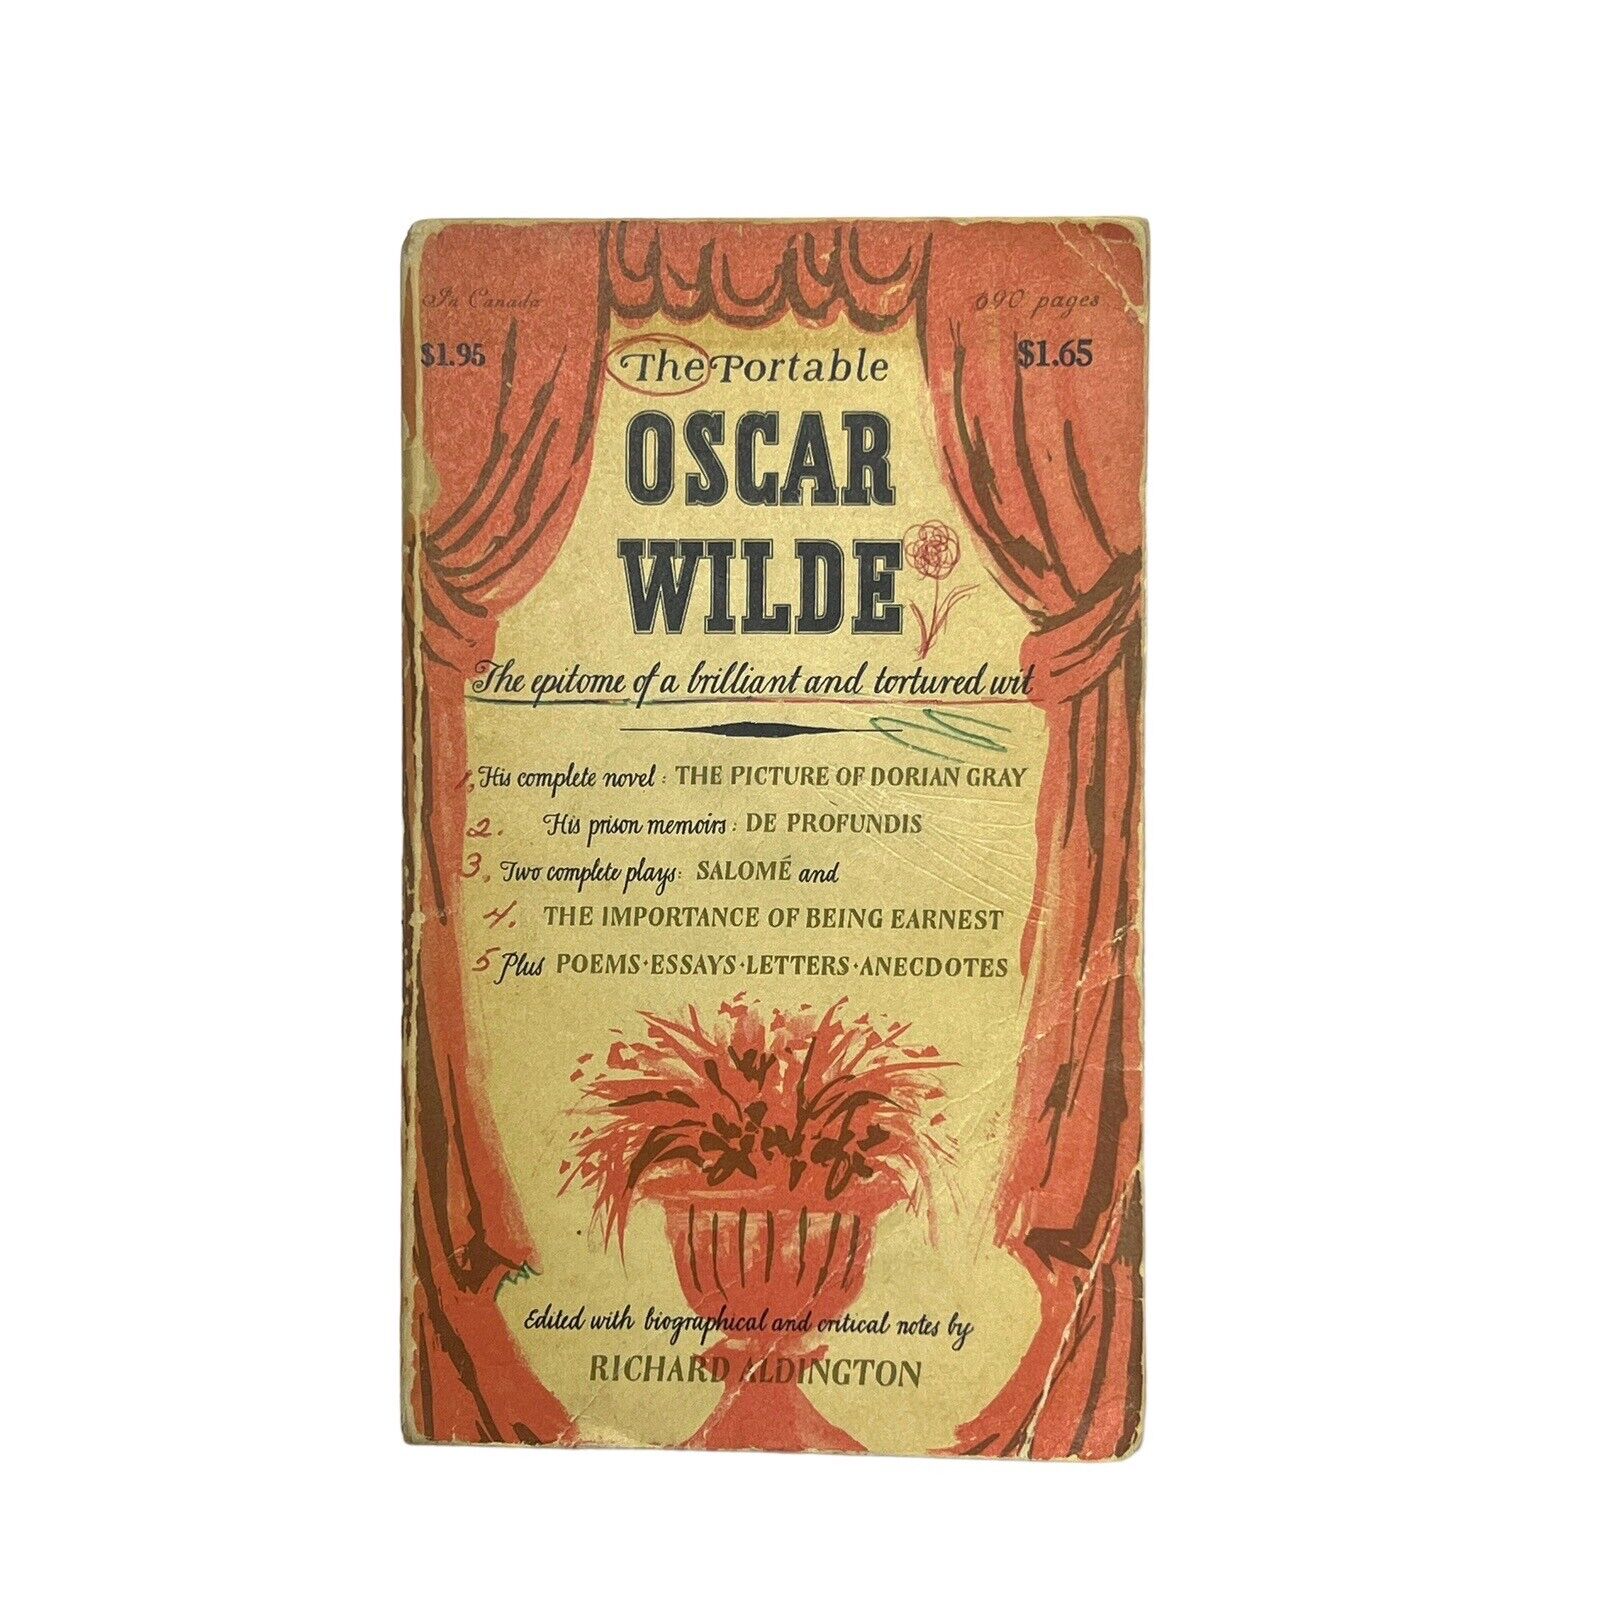 Oscar Wilde THE PORTABLE, 1st Edition, 9th Printing Vintage Poetry Poem Antique